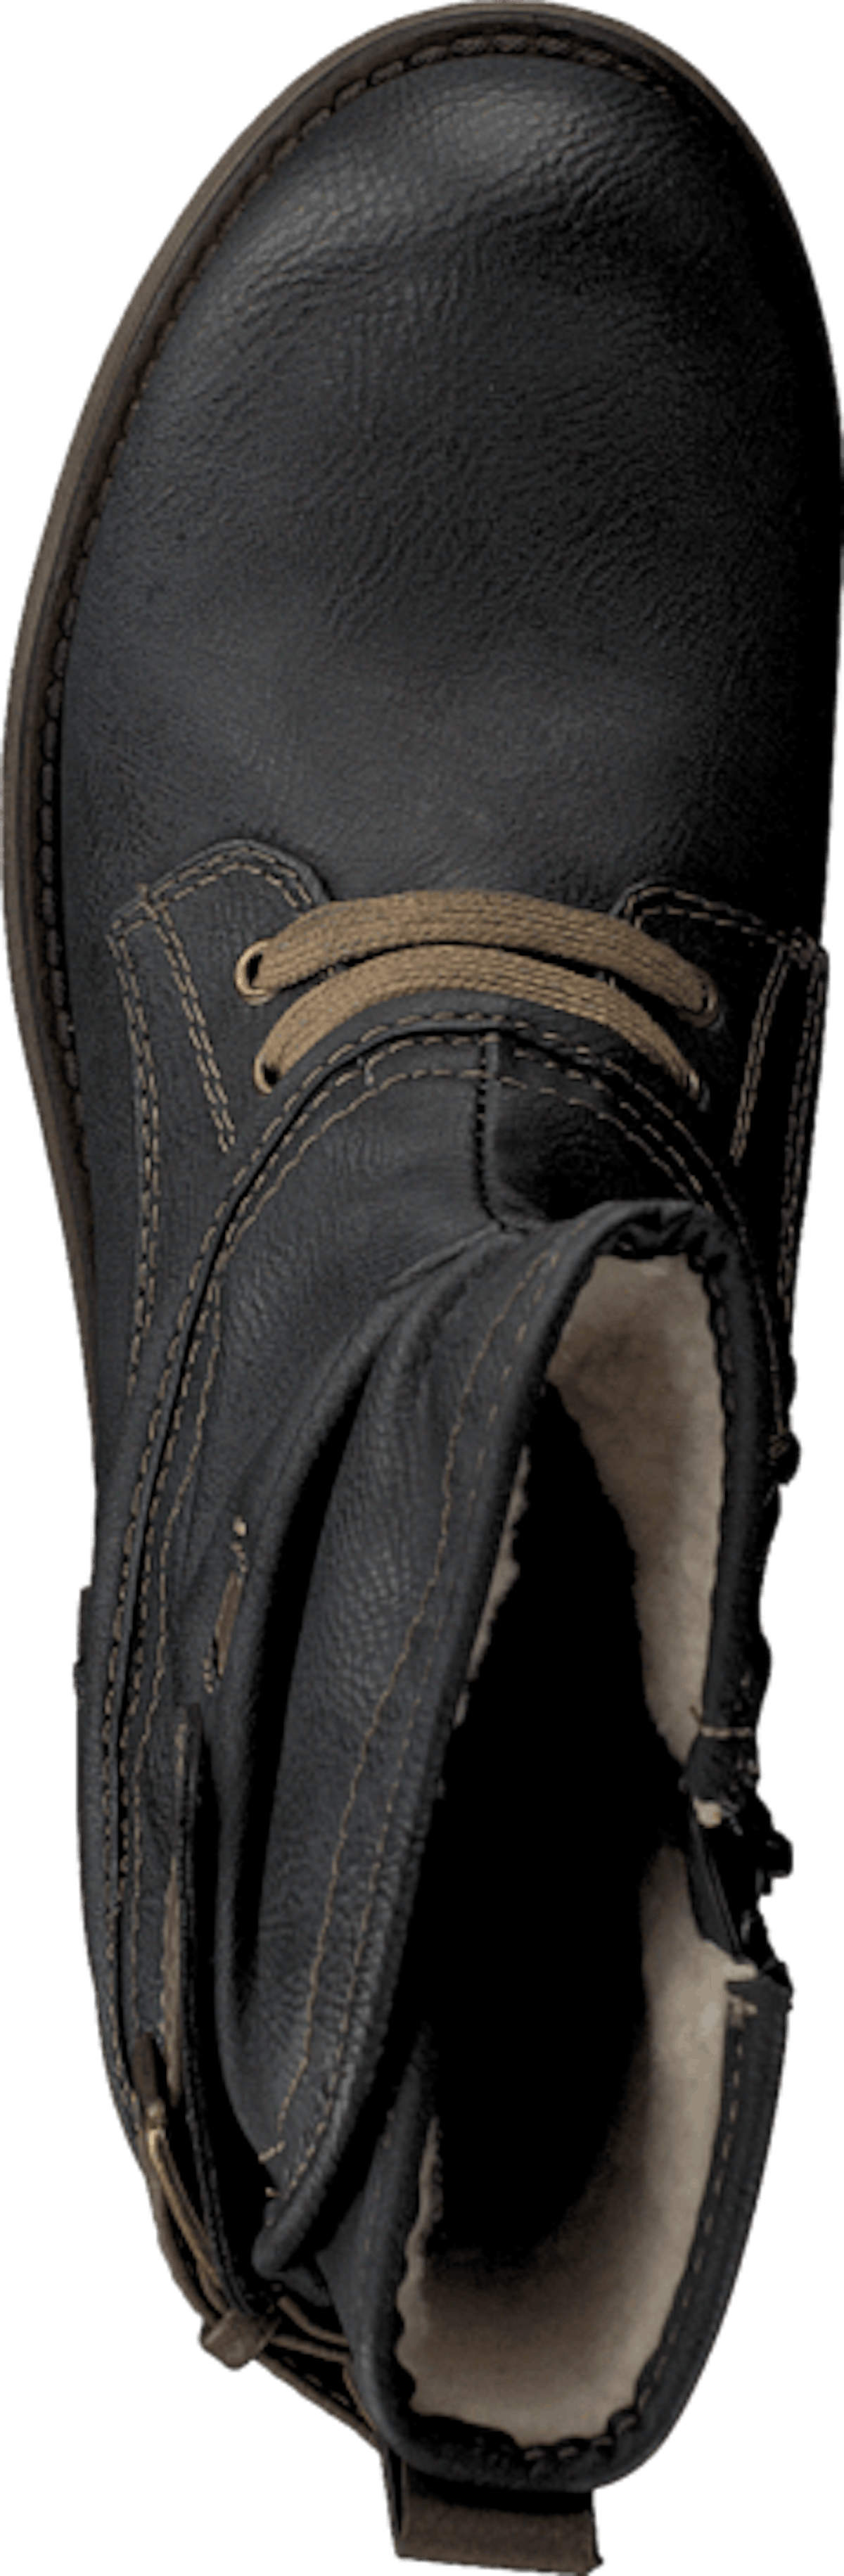 5026607 Youth Bootie Graphite